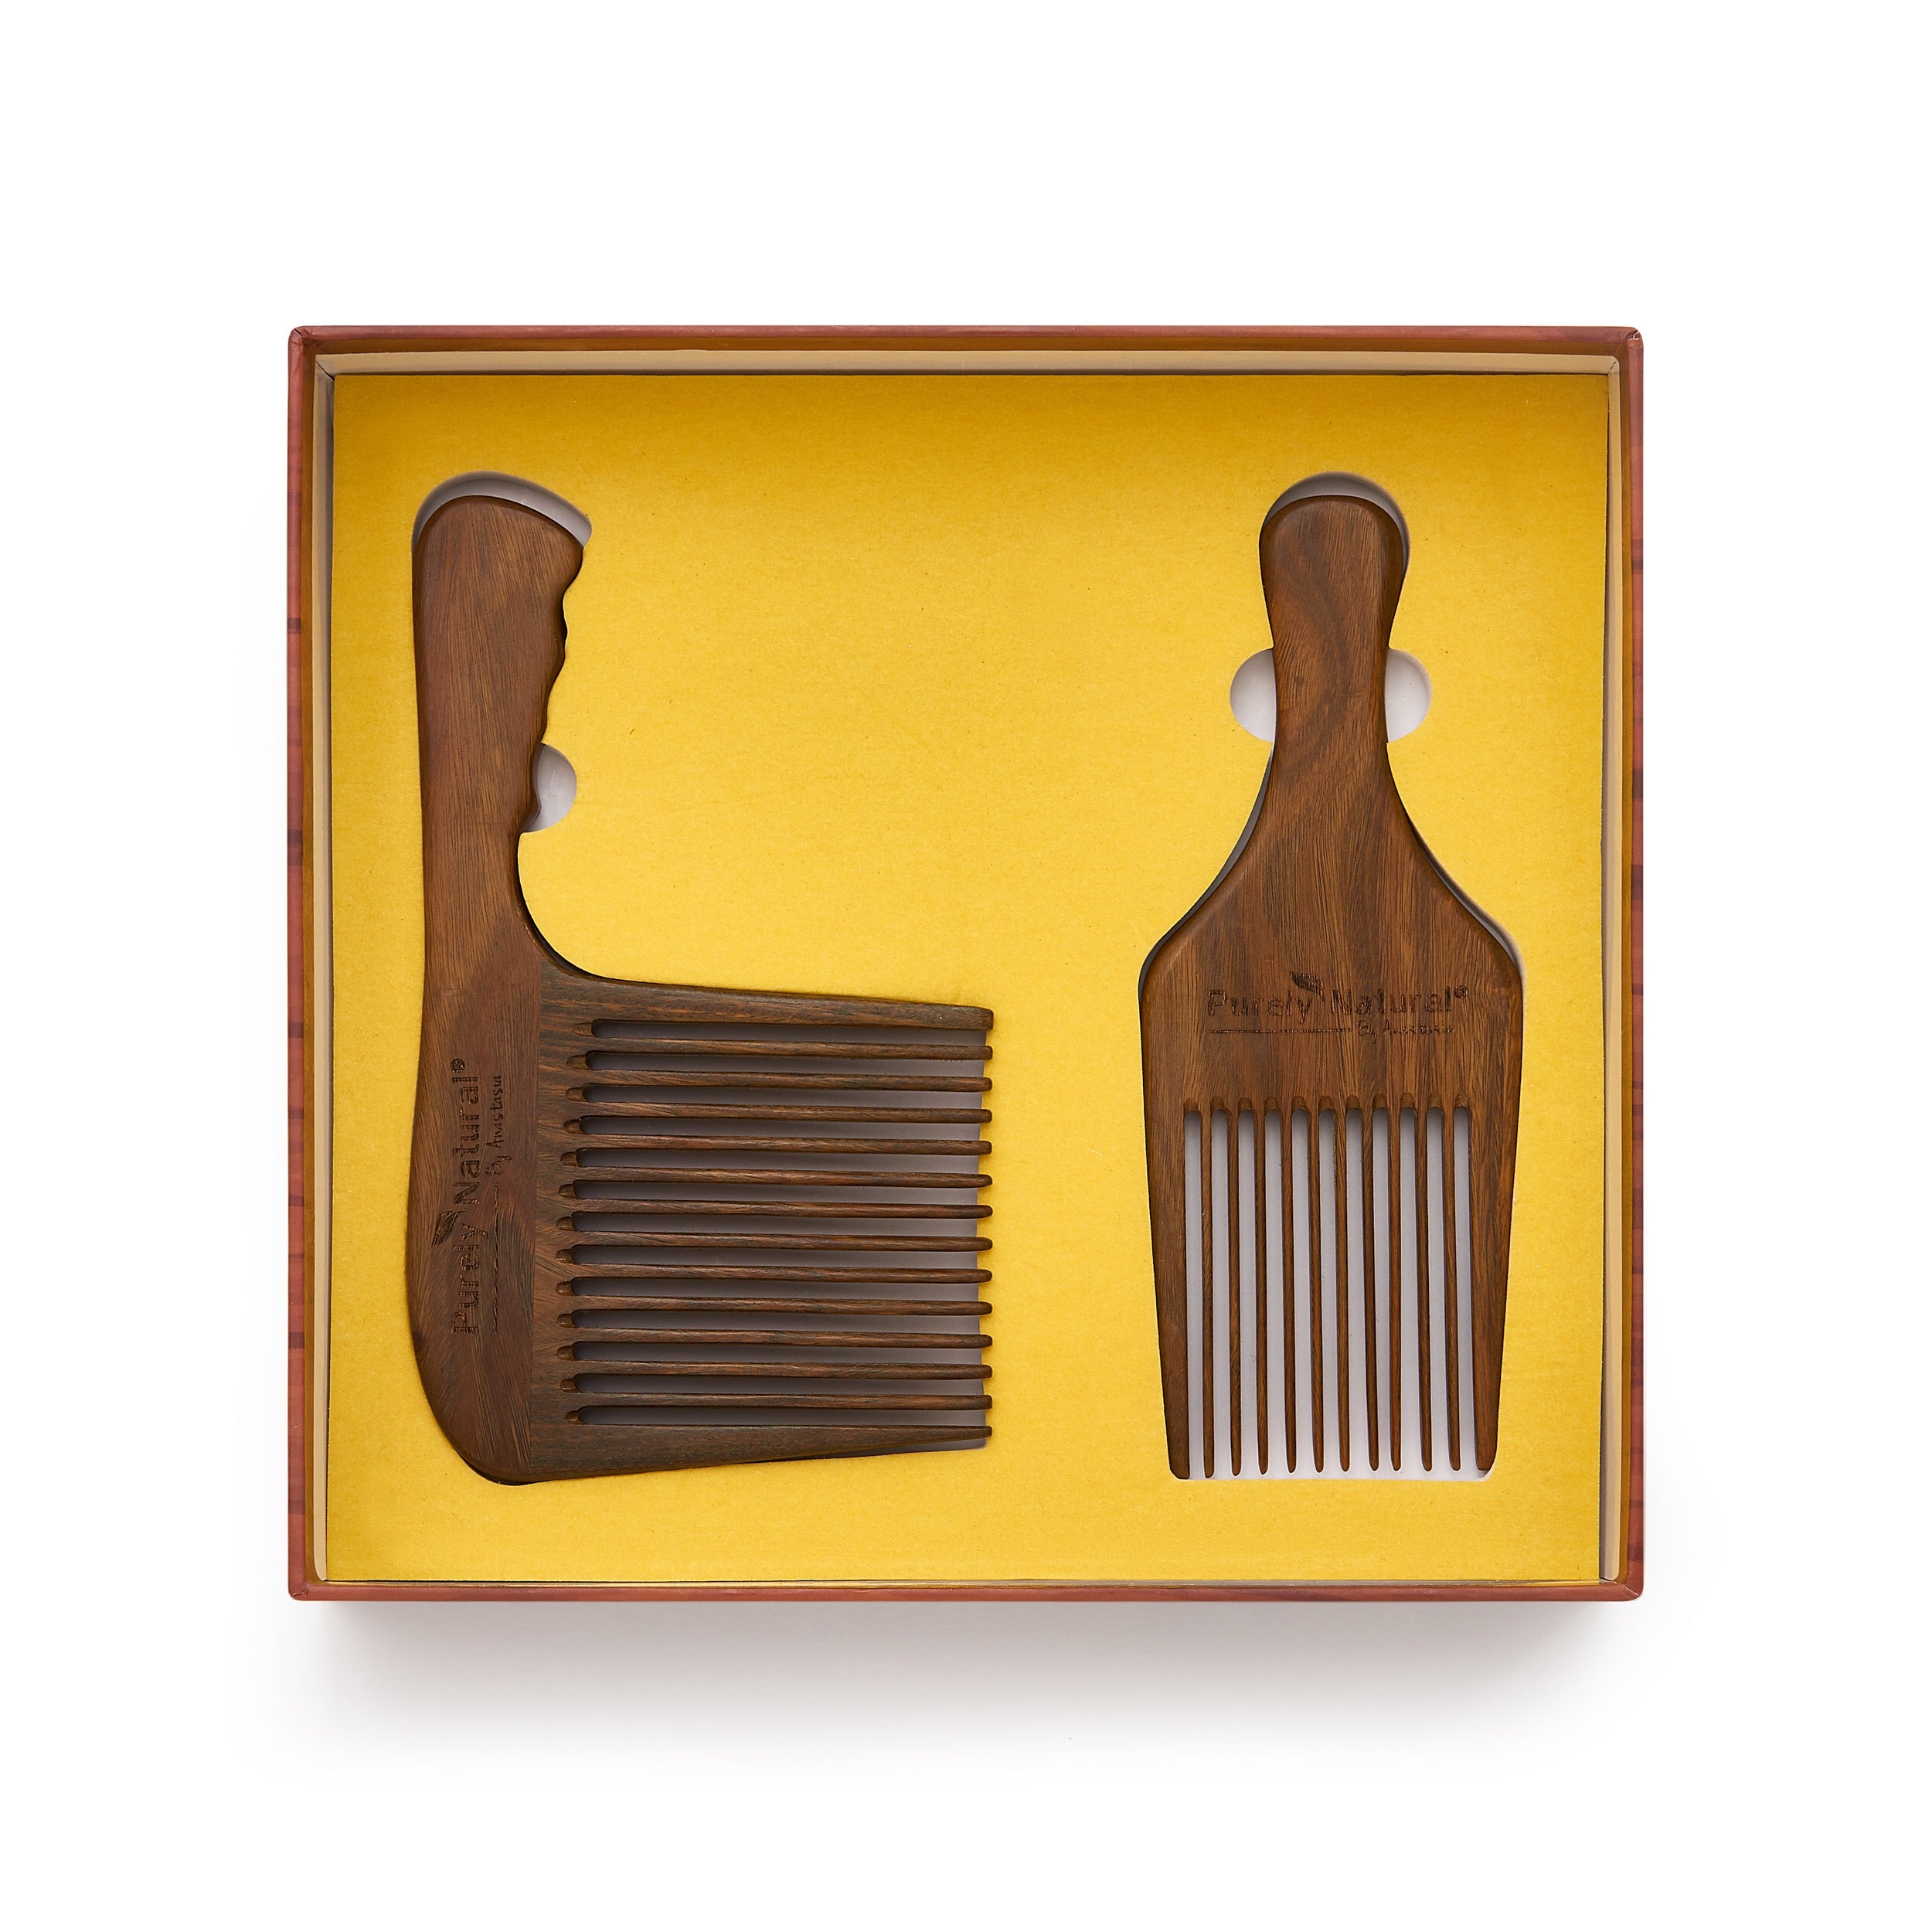 WOODEN SIX COMB AND BRUSH SET